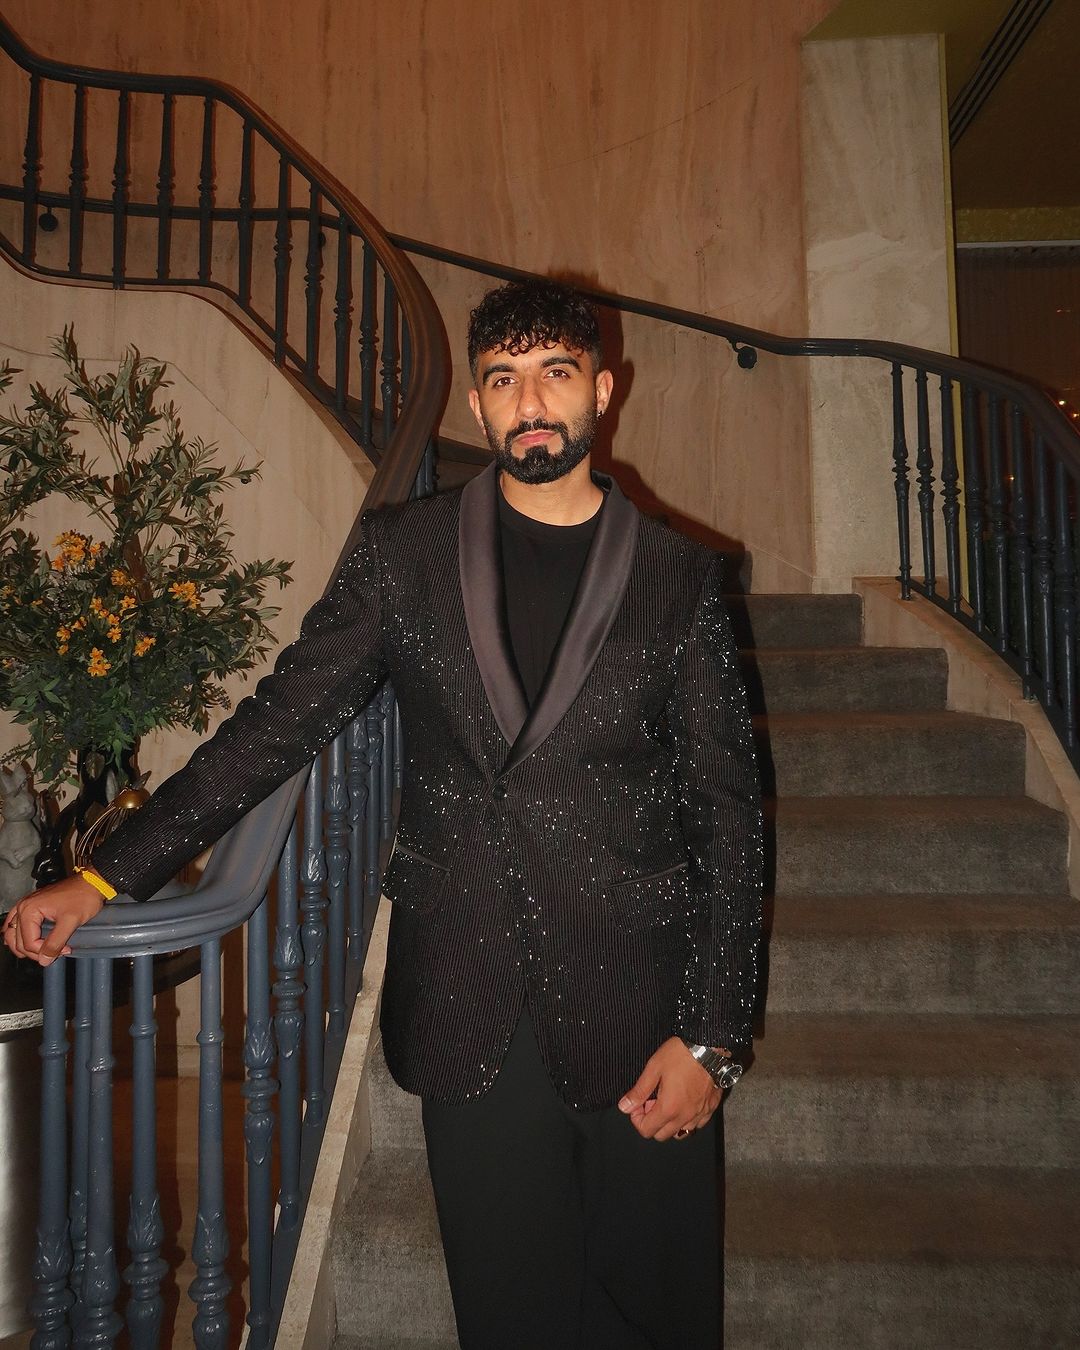 Manav Chhabra Amps up the Glam Quotient in Shades of Black